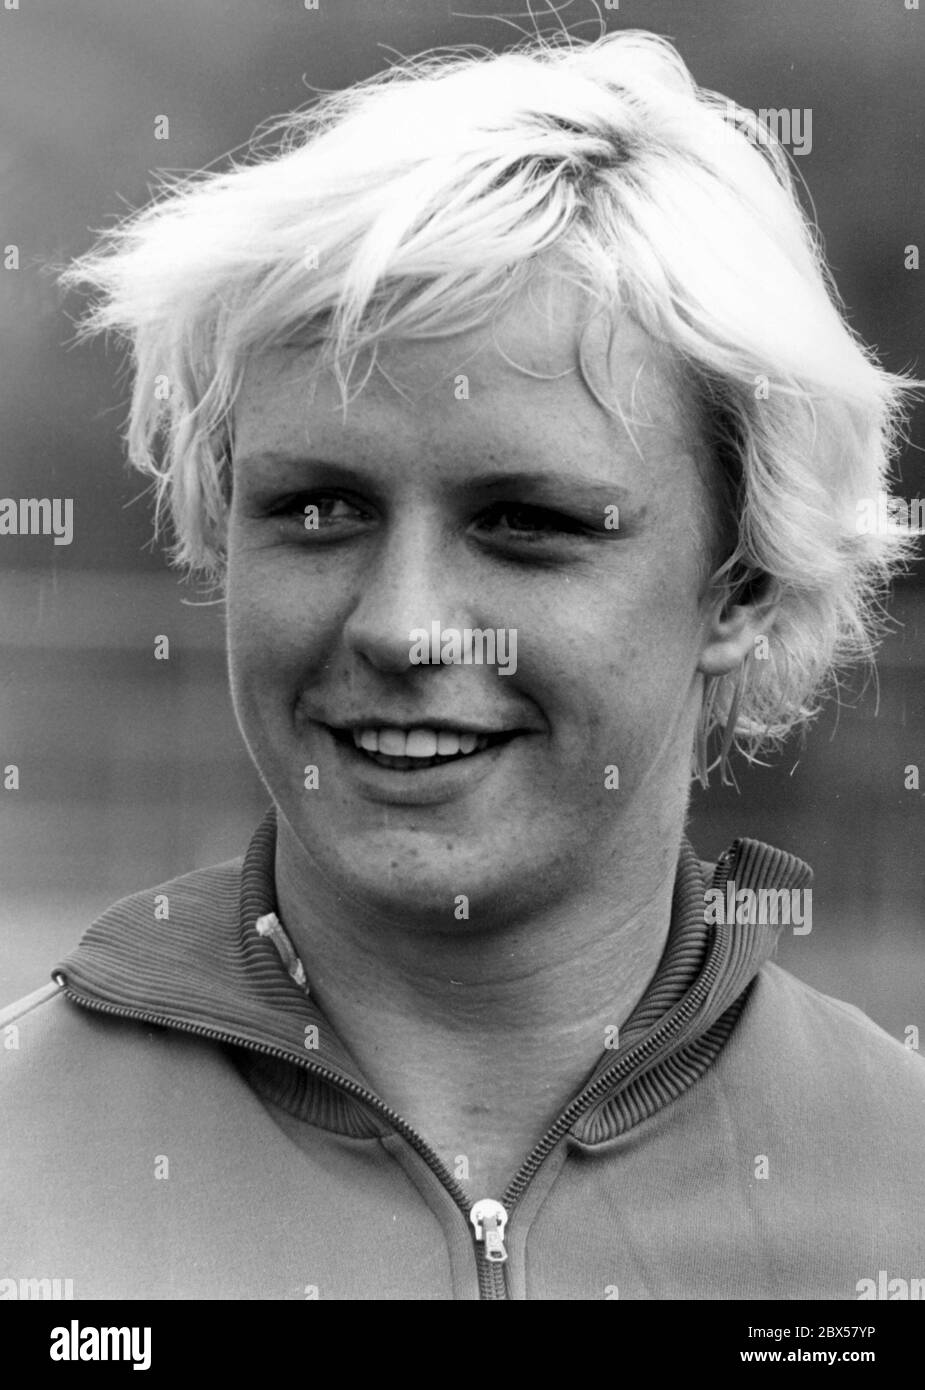 Ilona Slupianek, born Schoknecht in 24.09.1956. An East German athlete, Olympic champion at the Olympics 1980 in Moscow in women's shot put. In 1977 she was tested positive for doping and was locked for a year as the first East German sportswoman. Between 1976-1986 she was representative of the Volkskammer. Portrait at the European Athletics Indoor Championships on February 21, 1976 in Munich. Stock Photo